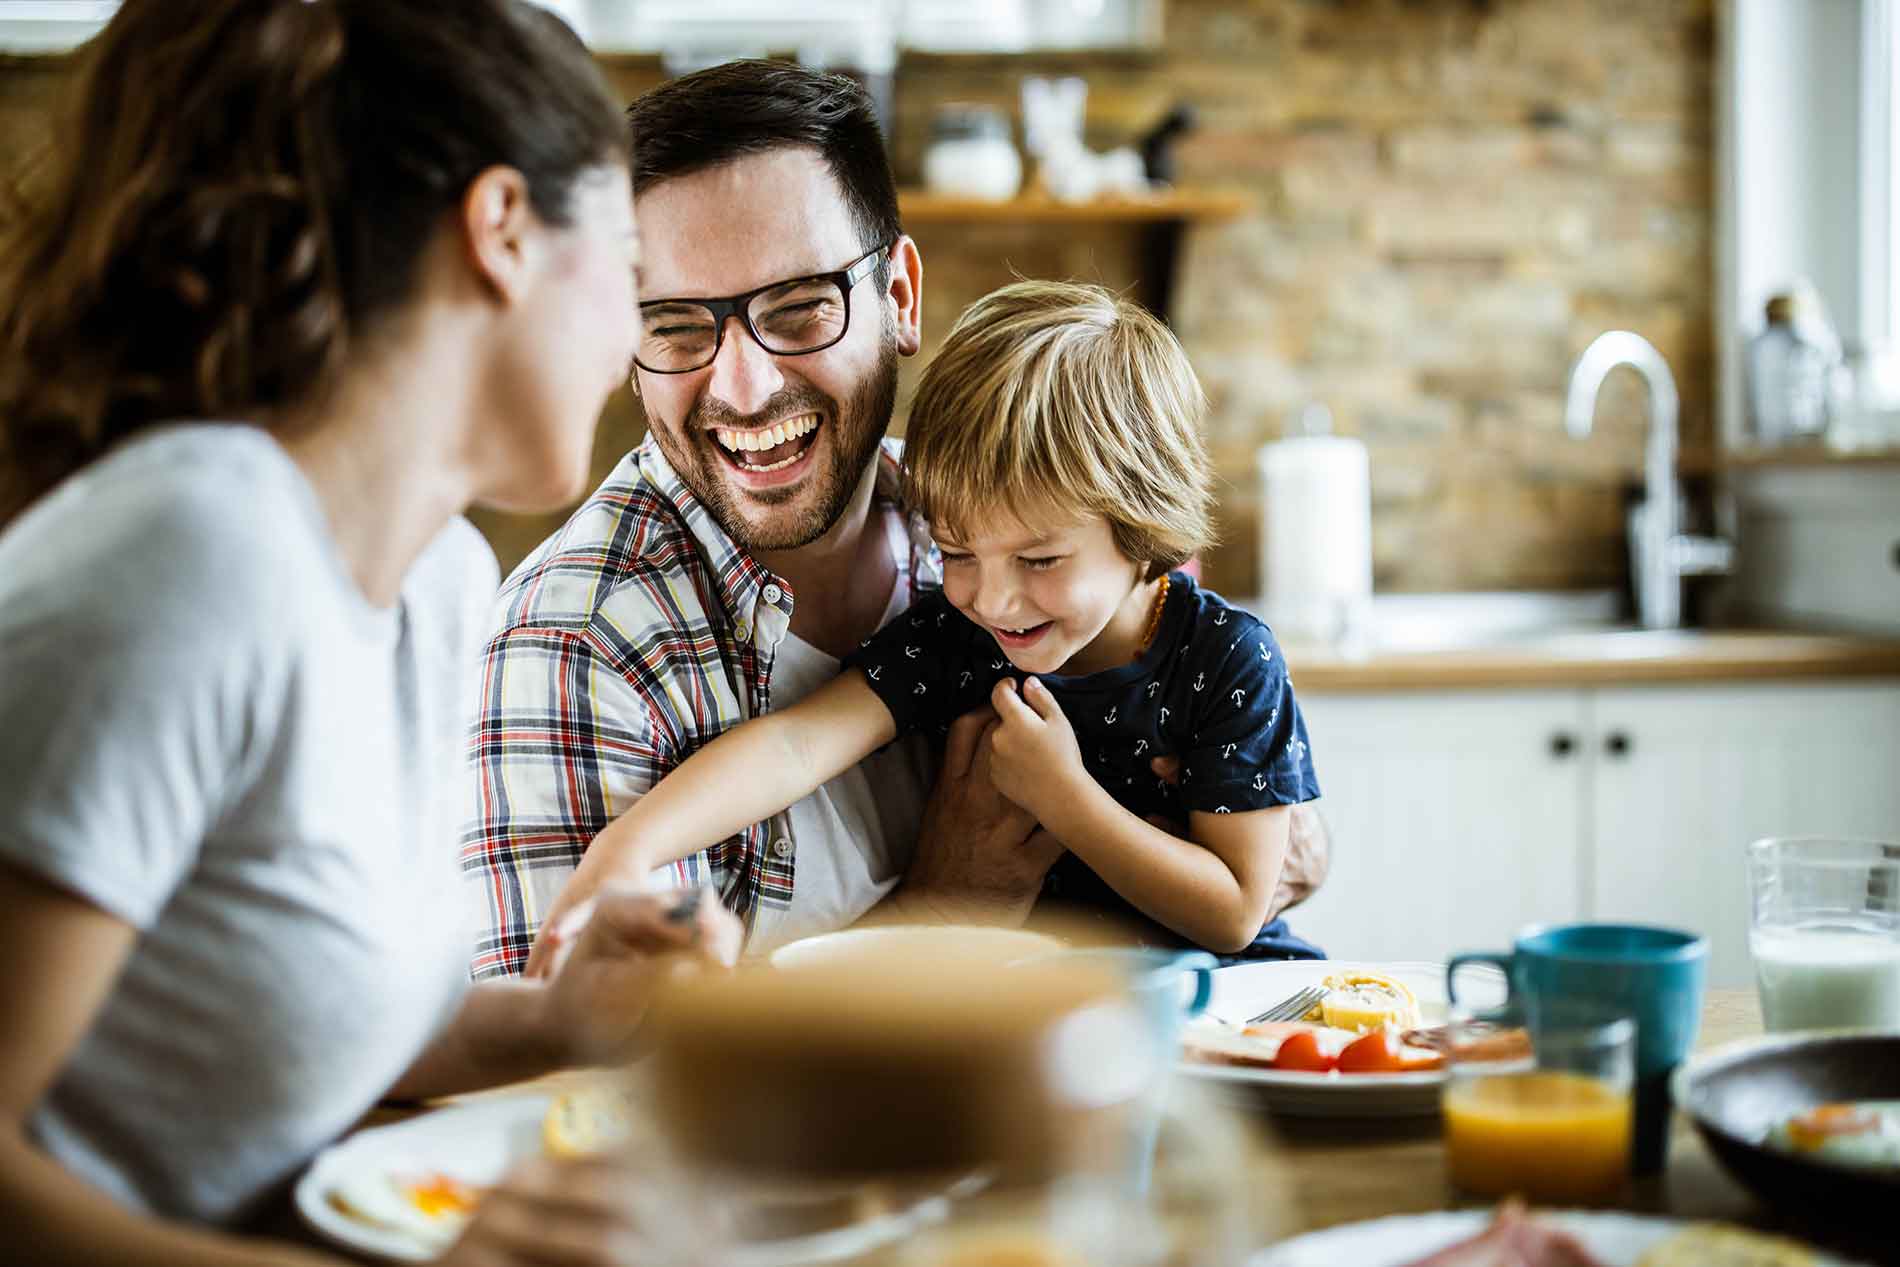 Husband holding son and laughing at dinner table with wife.